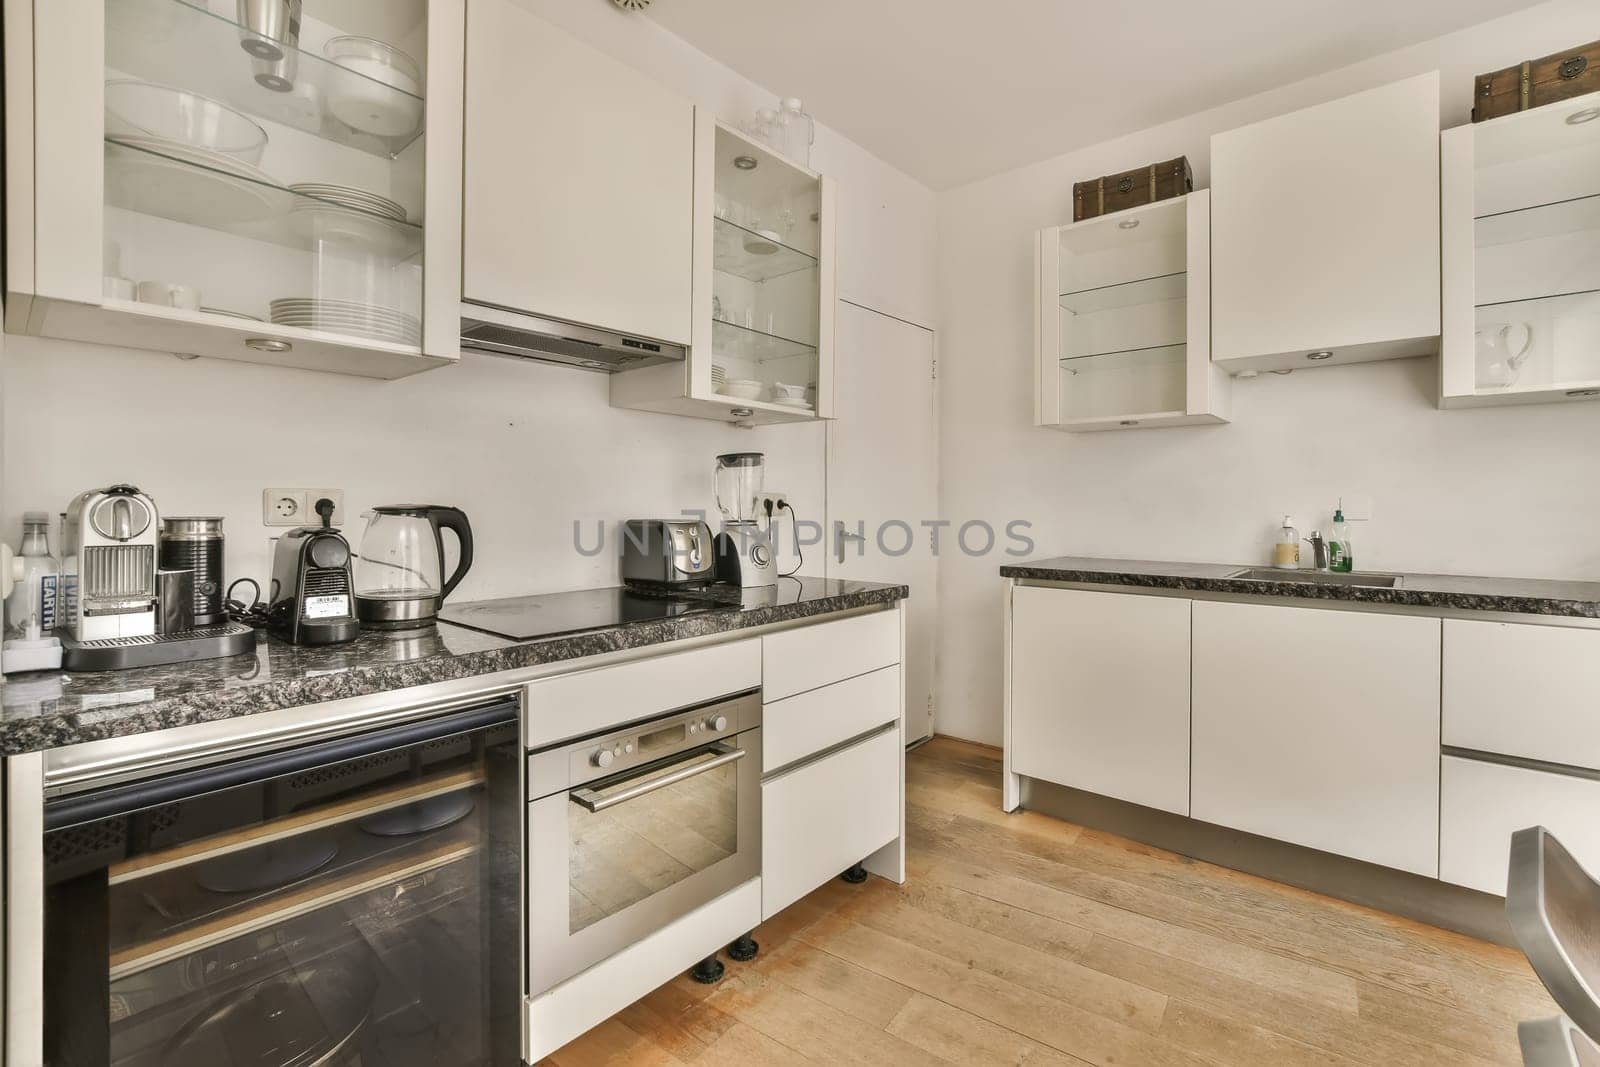 a kitchen with white cupboards and black counter tops on the stove in this photo is taken from the inside